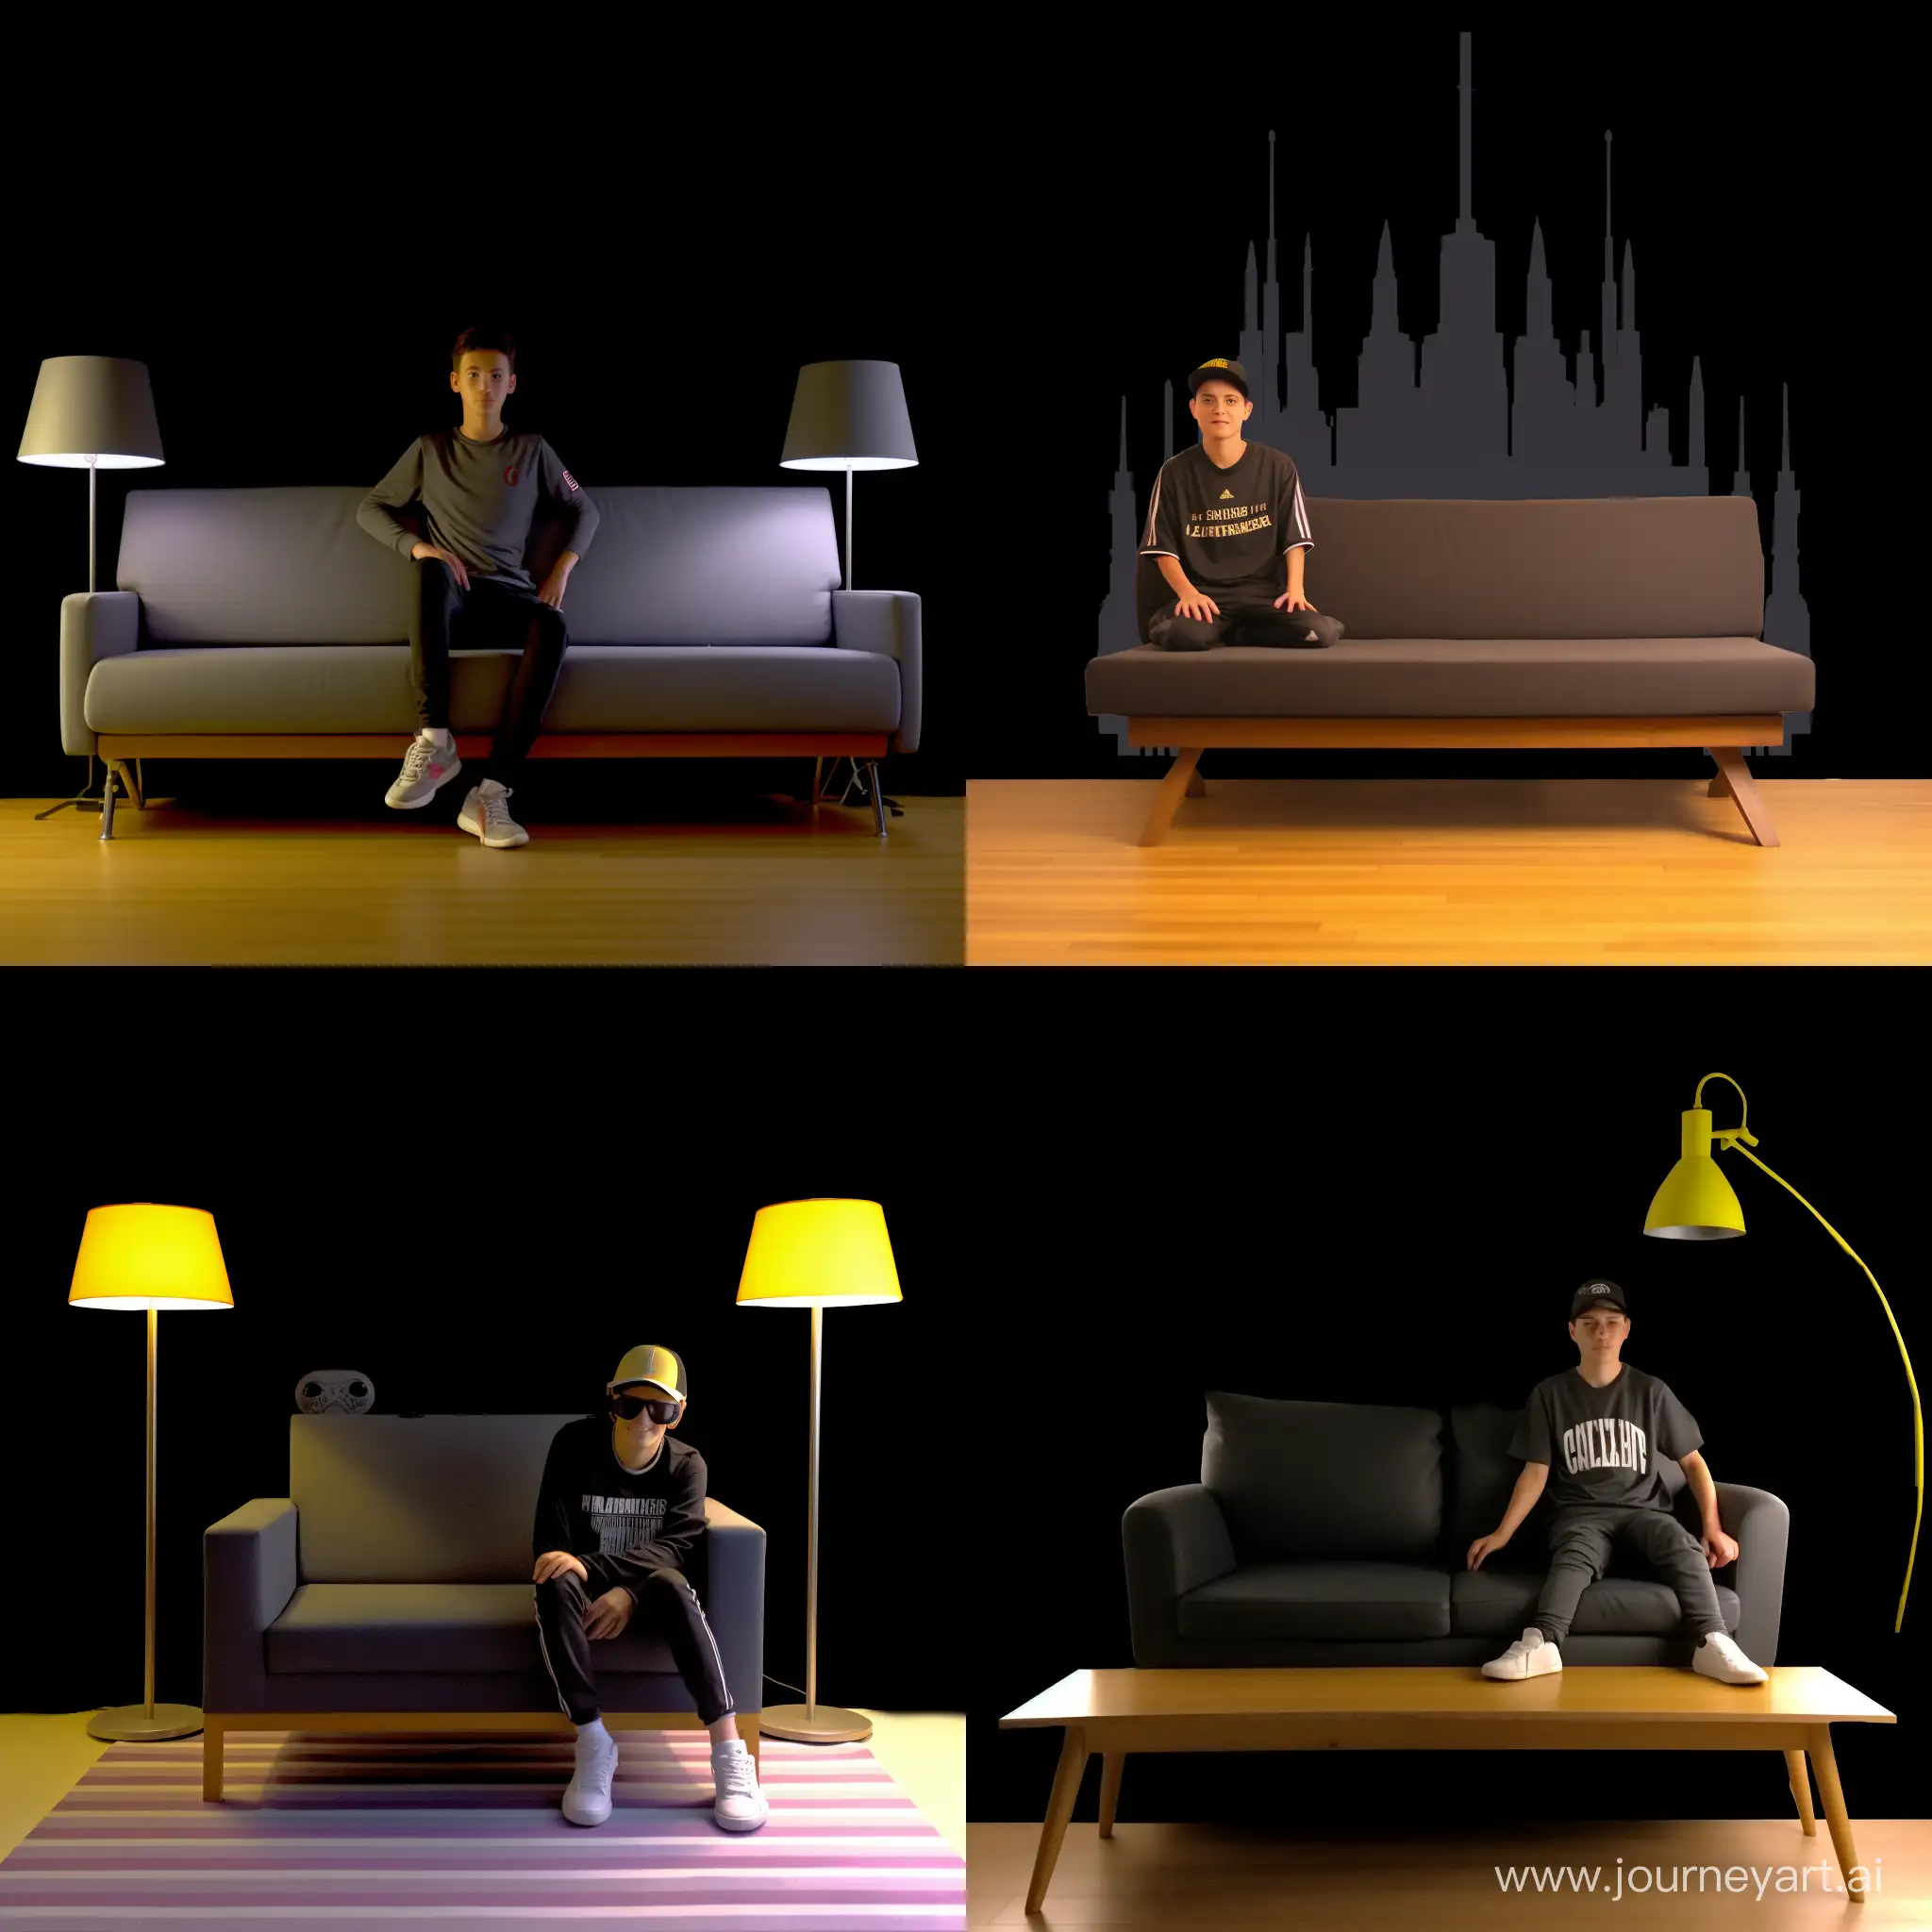 Create a 3D illusion for a profile picture where a "19" Year old cute "boy" in a black hoodie Sitting casually on a Wingback chair. Wearing sneakers, and sunglasses, she looks ahead. The background features "JAVAD" in big and capital Yellow neon light fonts on the dark grey wall. There should not be his shadow, and there are wings to make it appear as if he is an angel